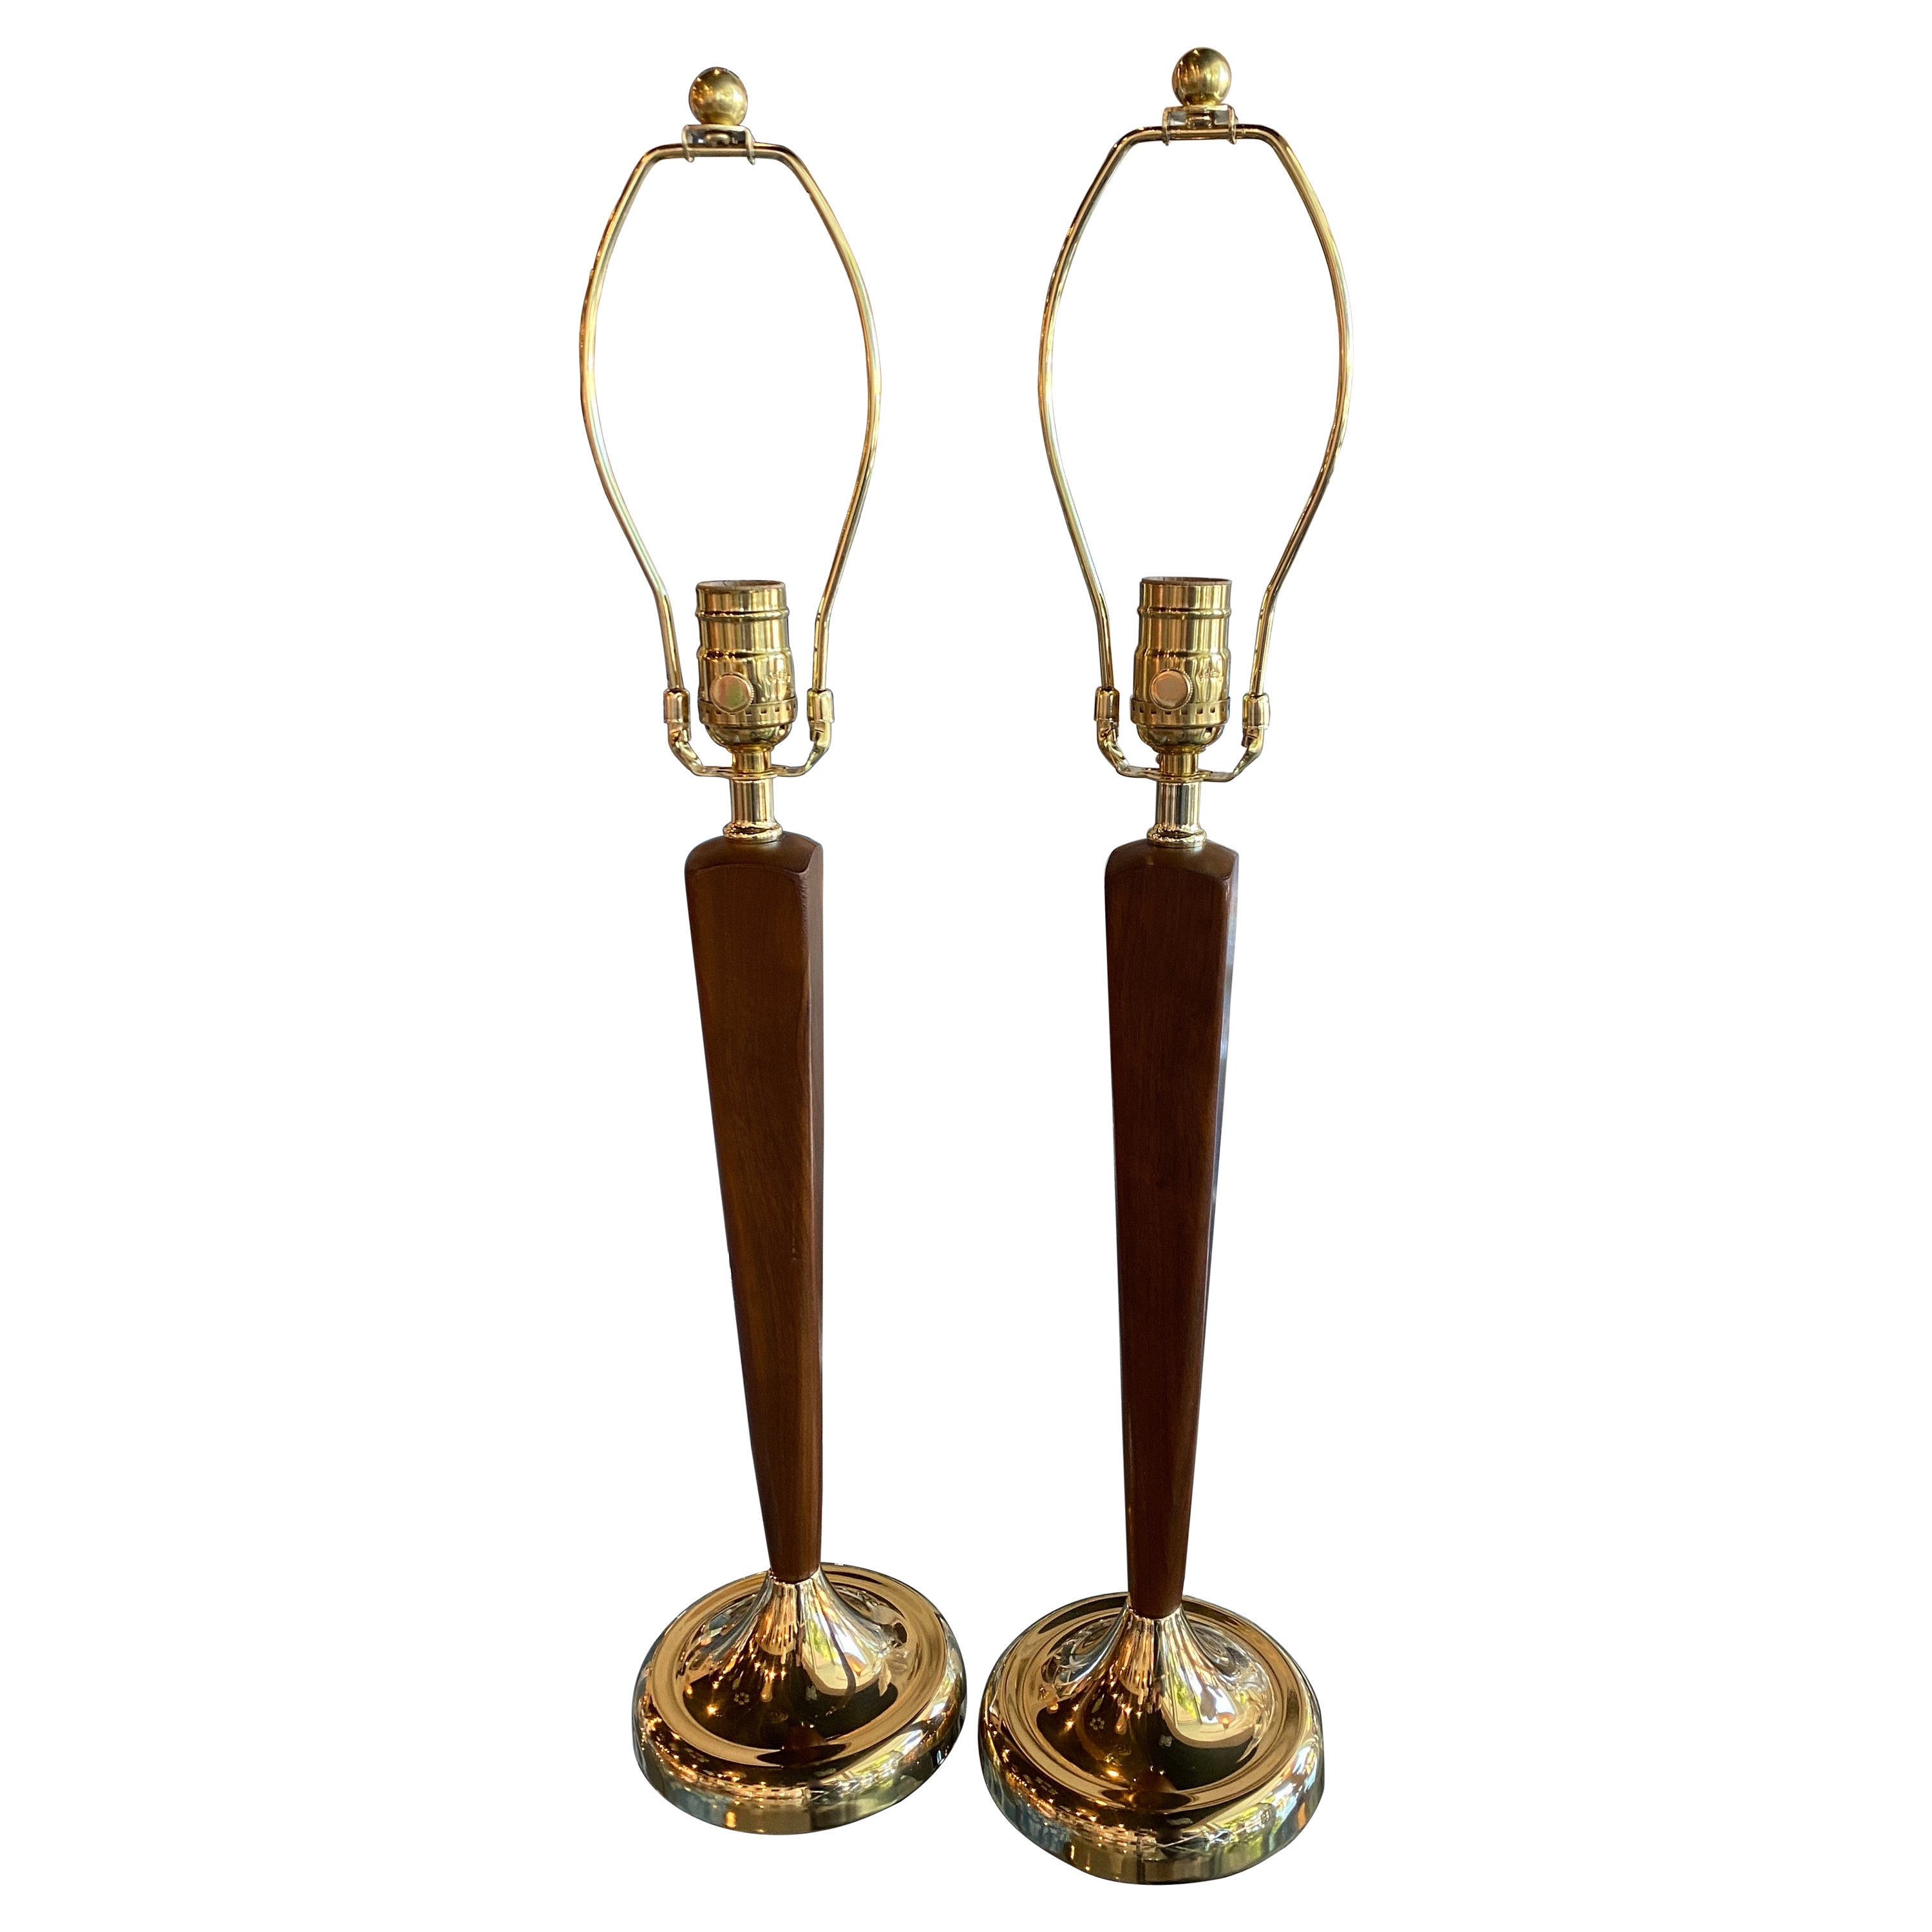 Vintage Pair Mid-Century Modern Danish Wood & Brass Table Lamps Restored For Sale